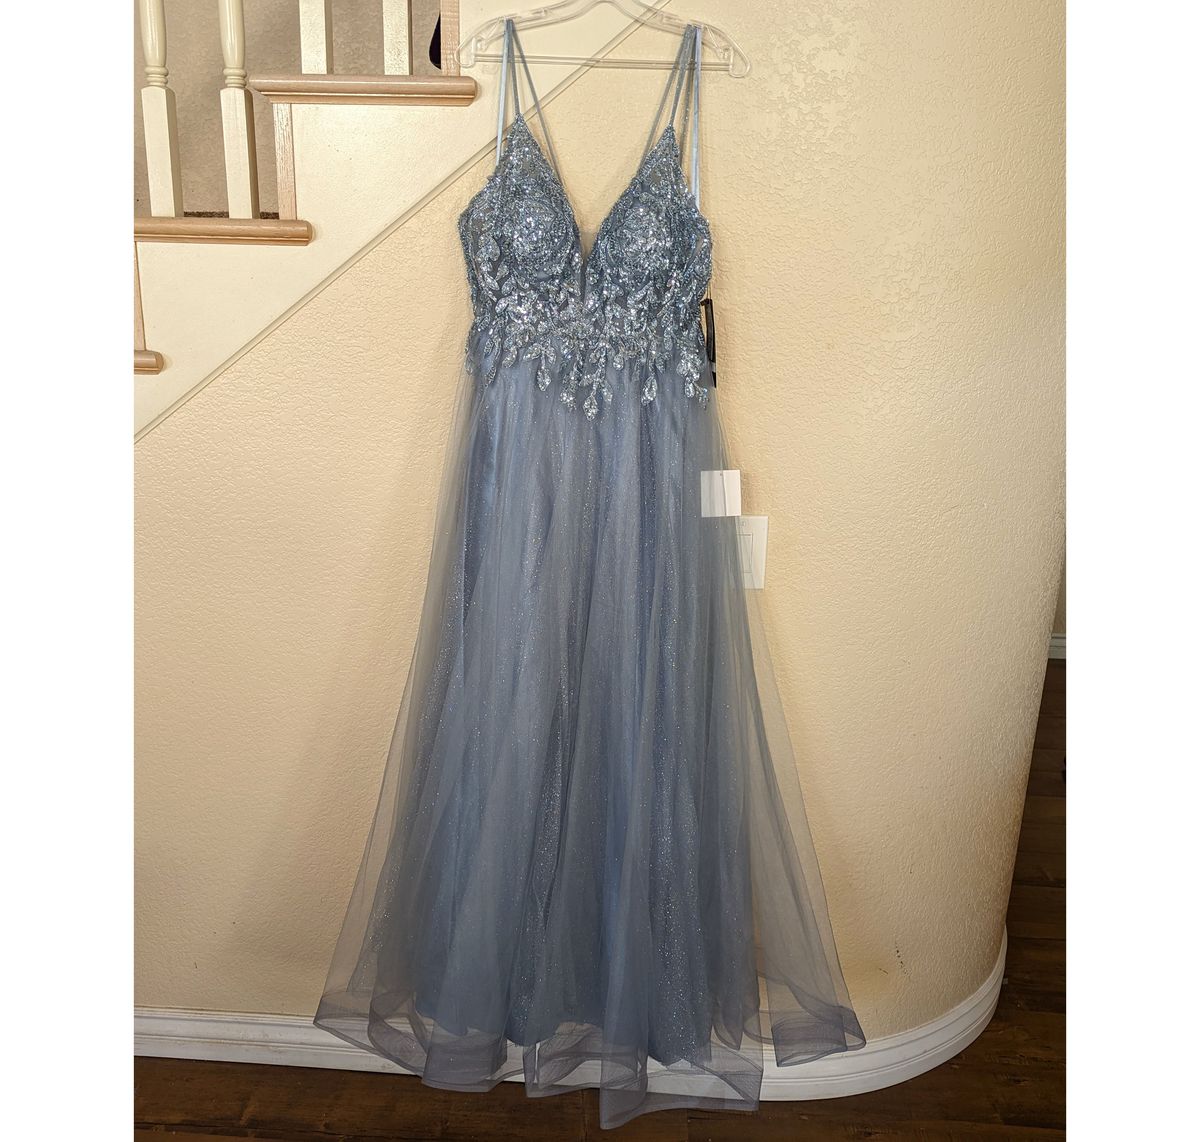 Style Smoky Blue Sleeveless Sequined Sparkle Tulle Formal Prom Ball Gown Dress Size 12 Prom Plunge Sheer Light Blue Ball Gown on Queenly